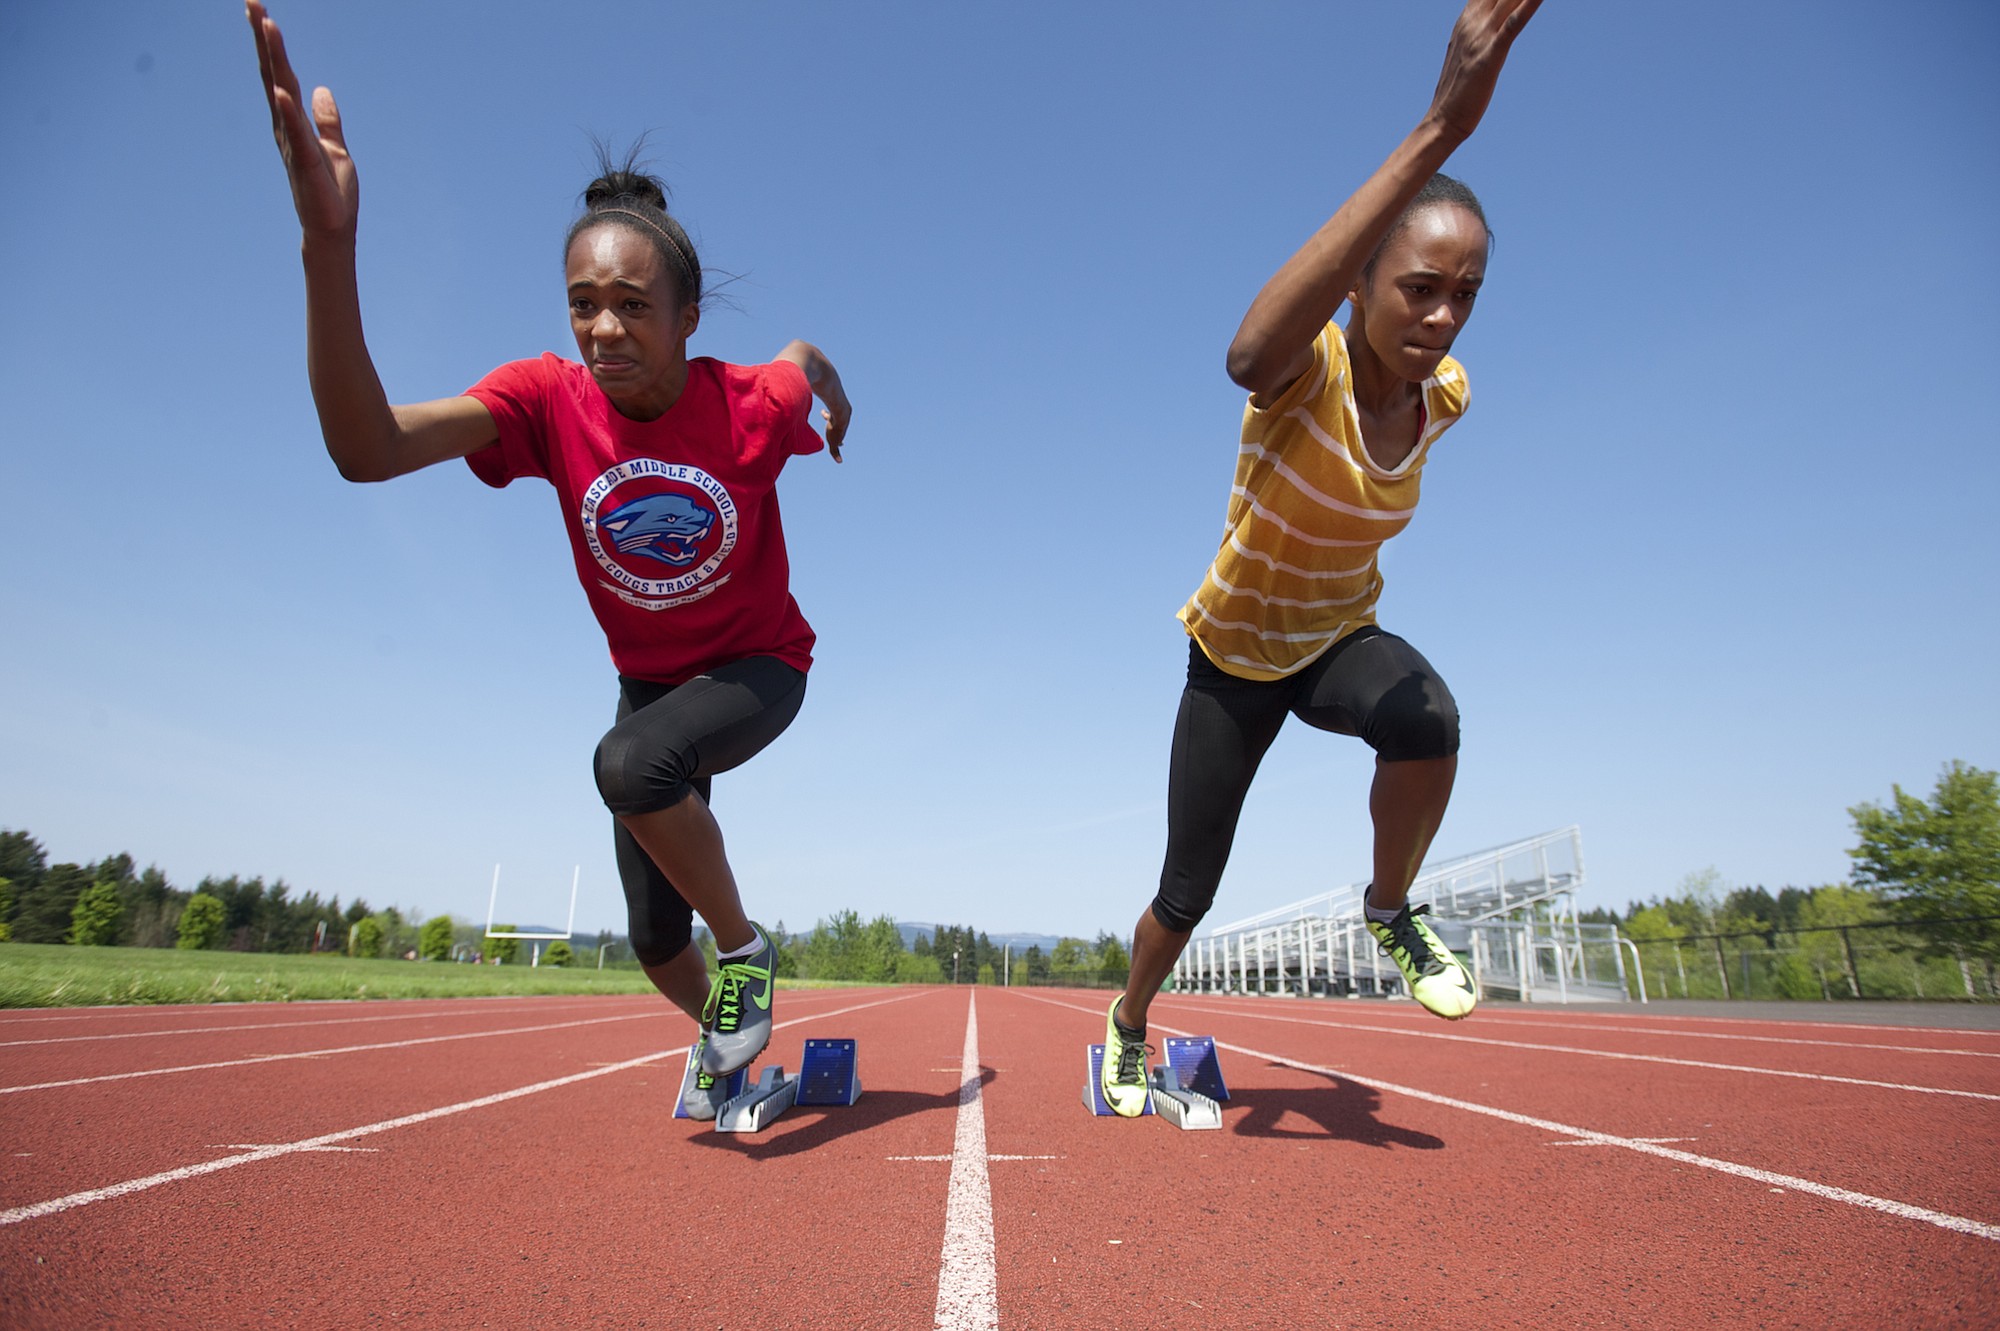 Union High School's identical twin sisters Dai'lyn, left, and Jai'lyn Merriweather shown, Thursday, April 30, 2015, are two of the top sprinters in the state.